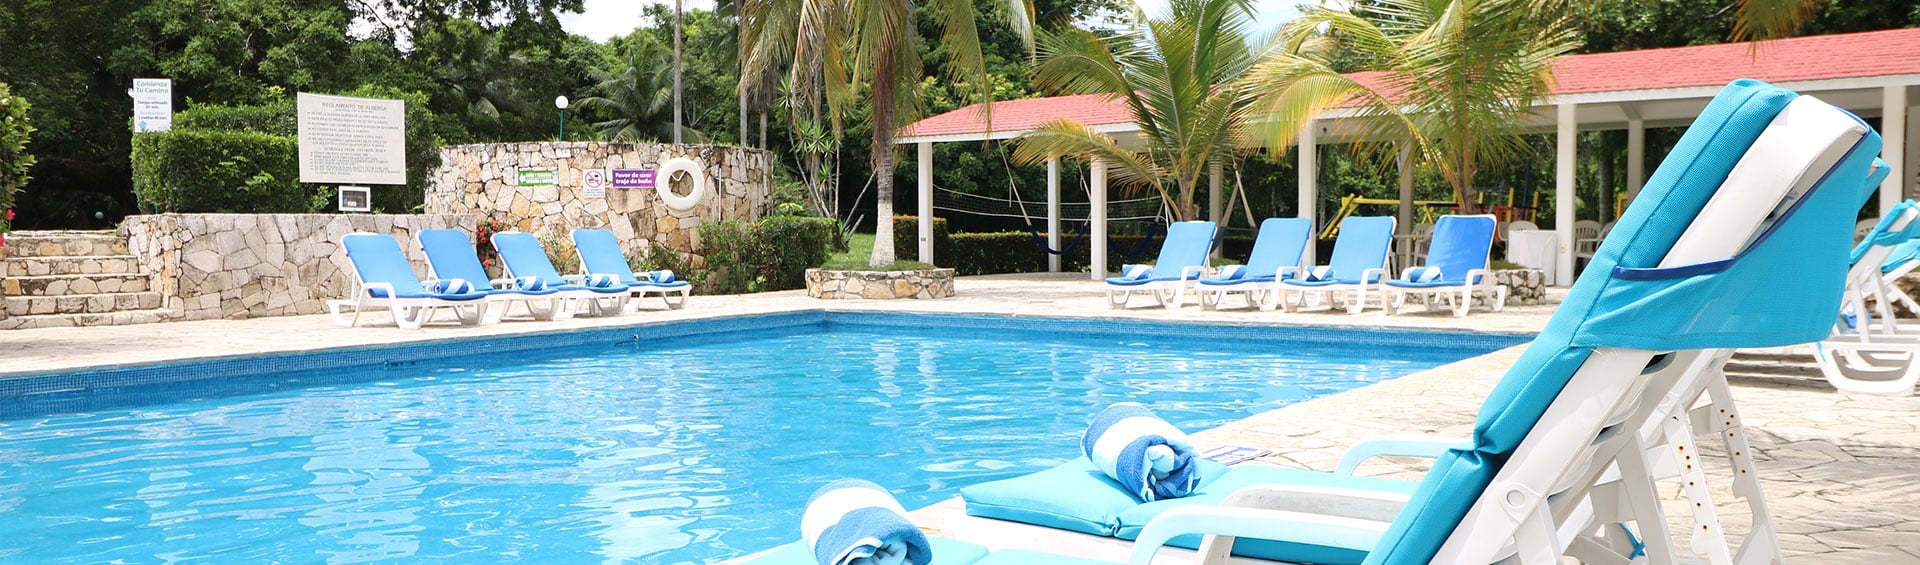 hotel-mision-palenque